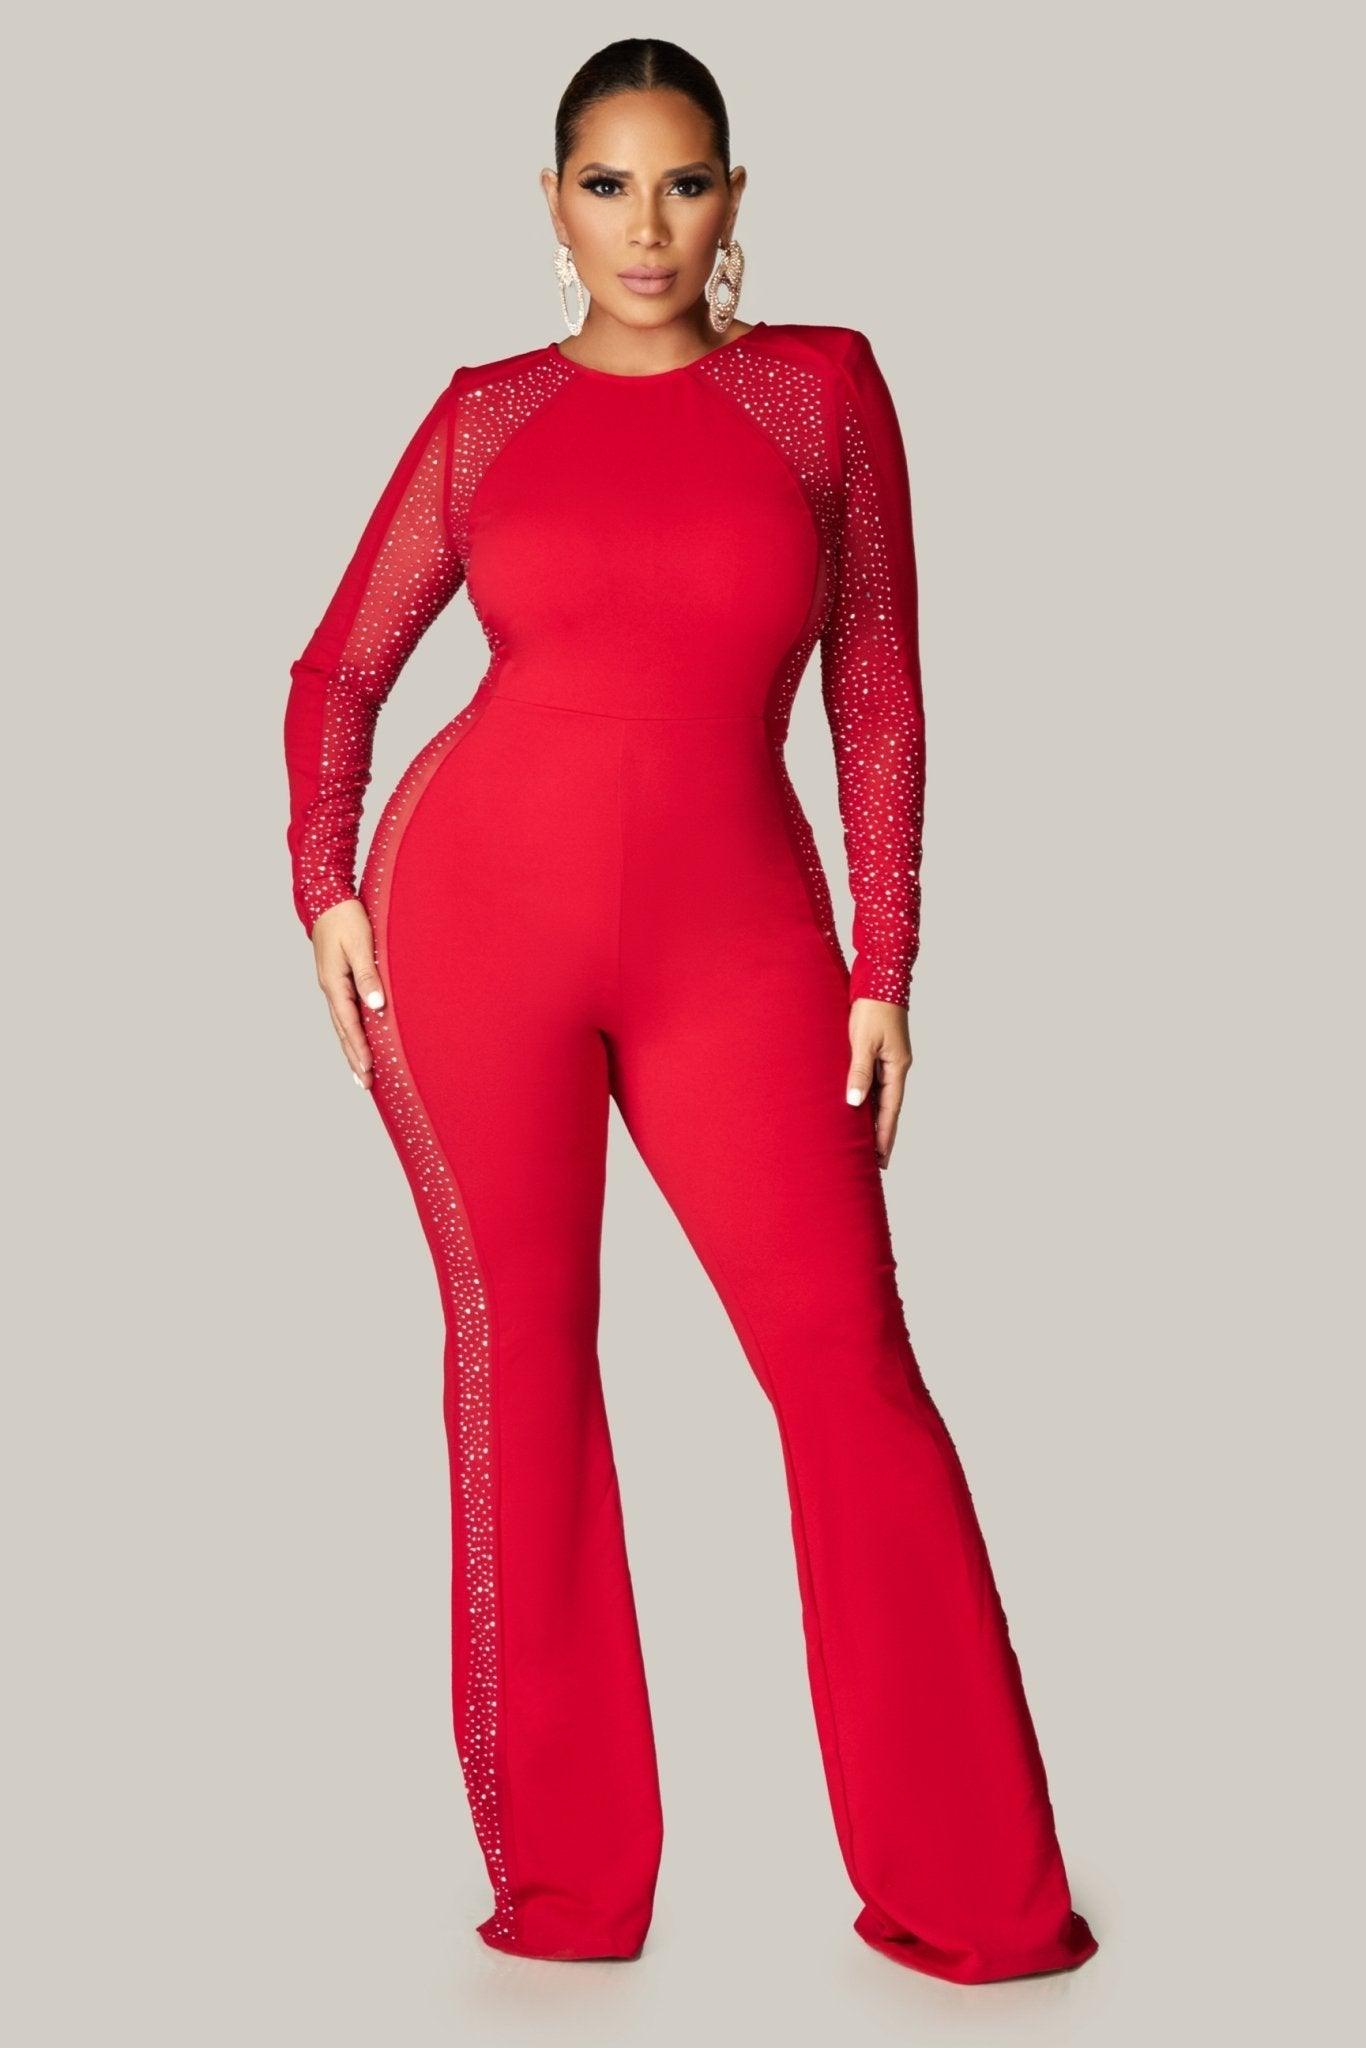 In Love Rhinestone Mesh Panelled Jumpsuit - MY SEXY STYLES